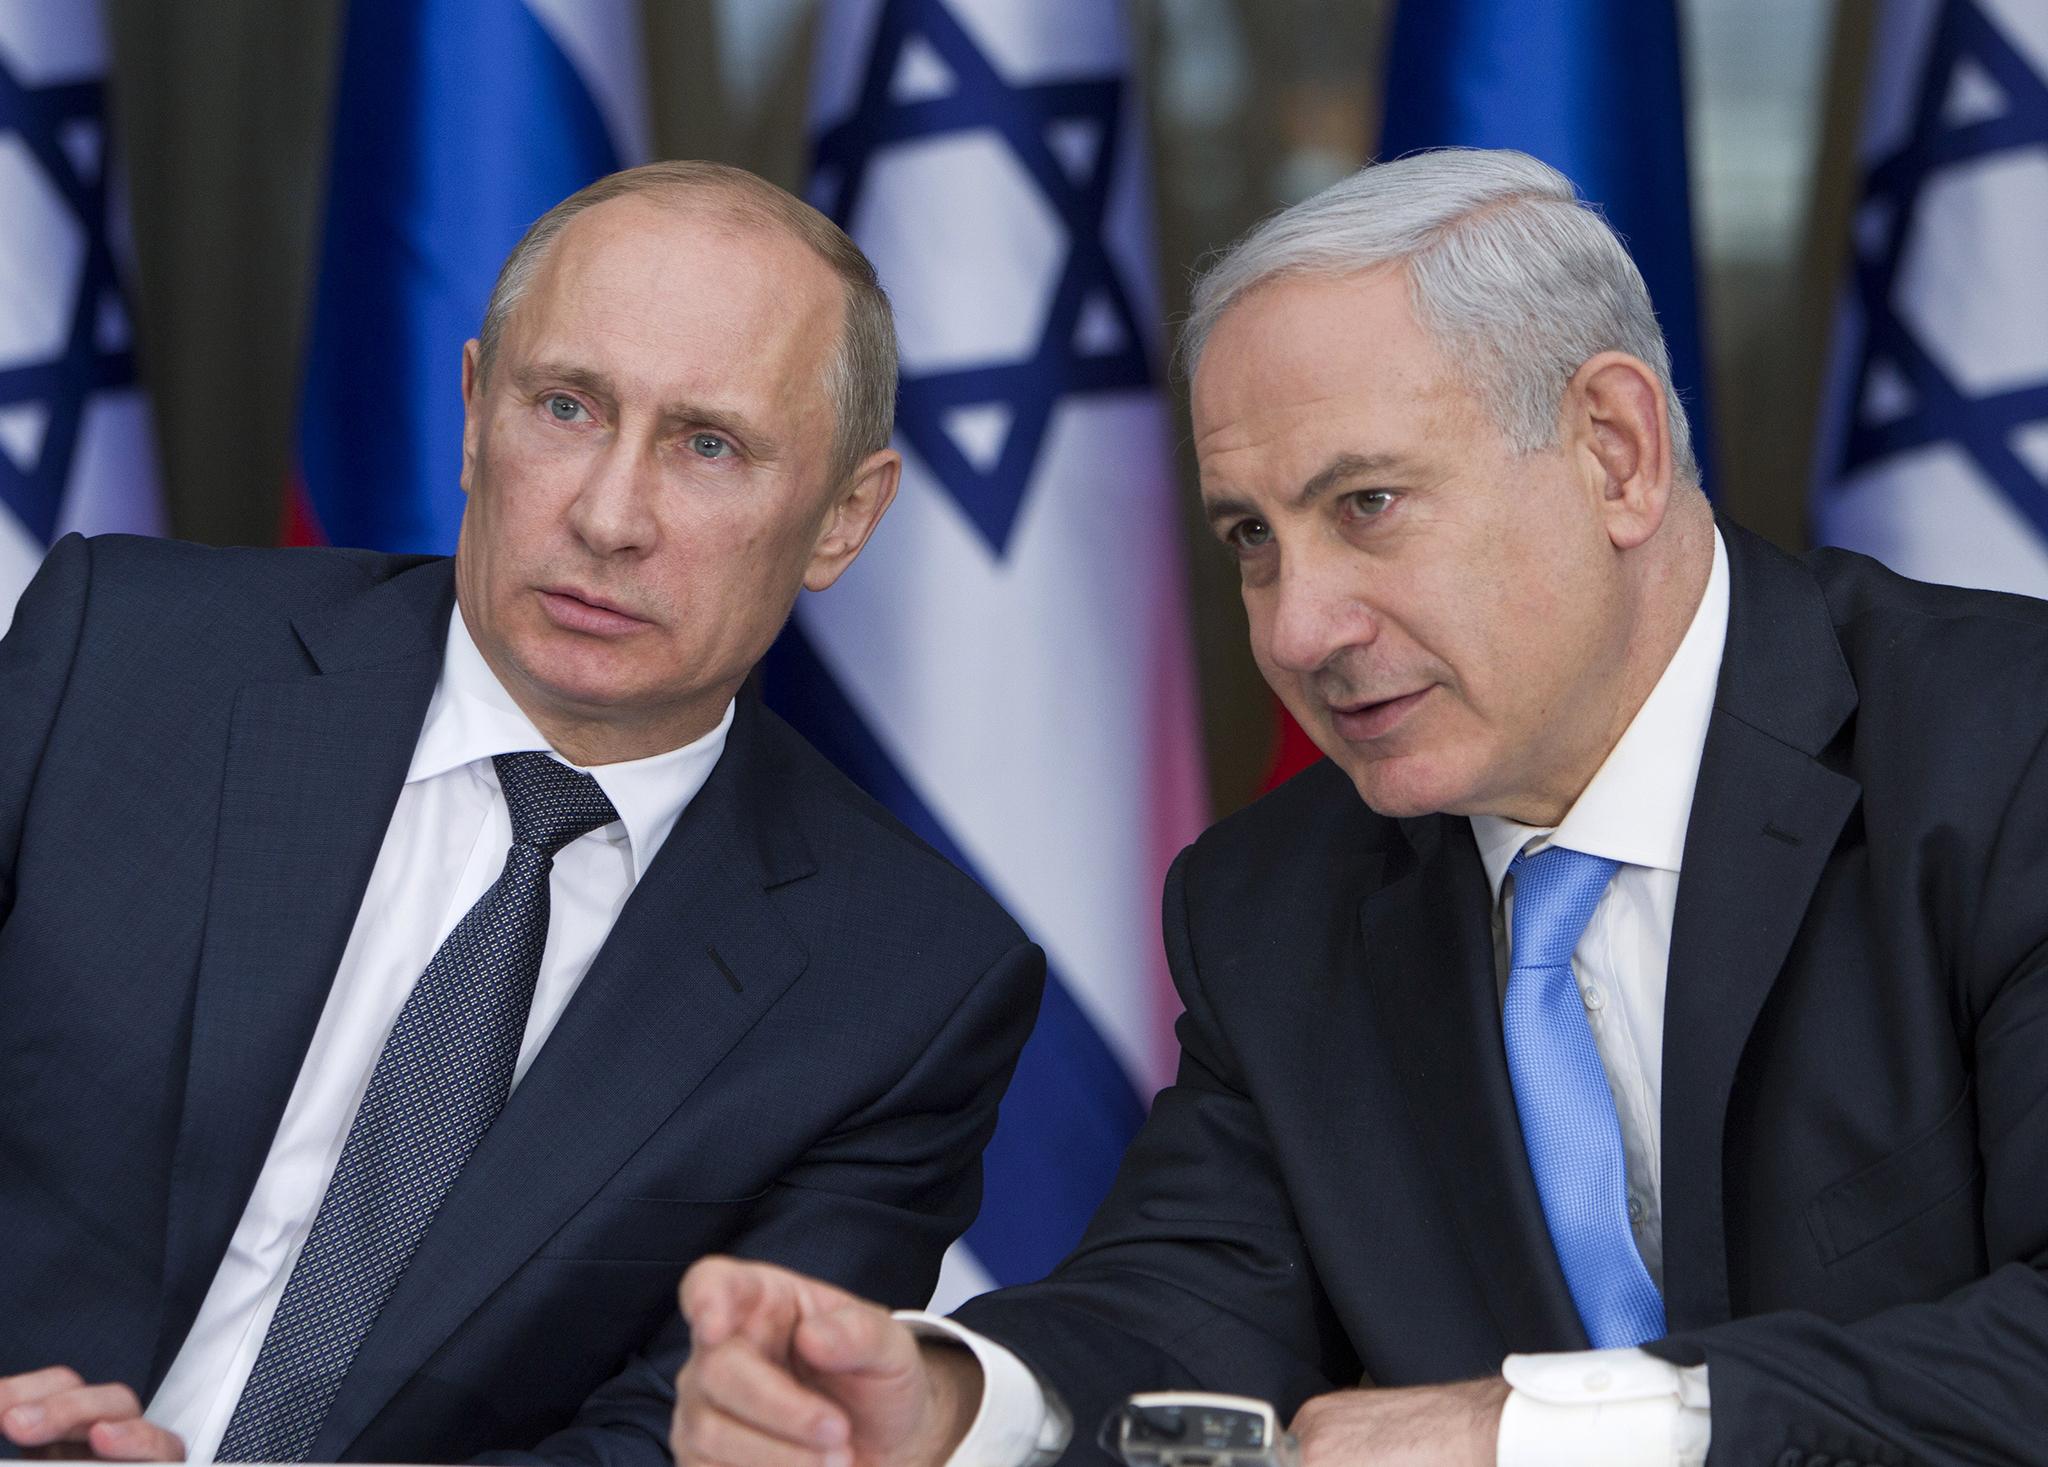 The Russian leader met Mr Netanyahu for the fourth time in a year in June, when they expressed mutual support for a ‘just’ solution to the conflict